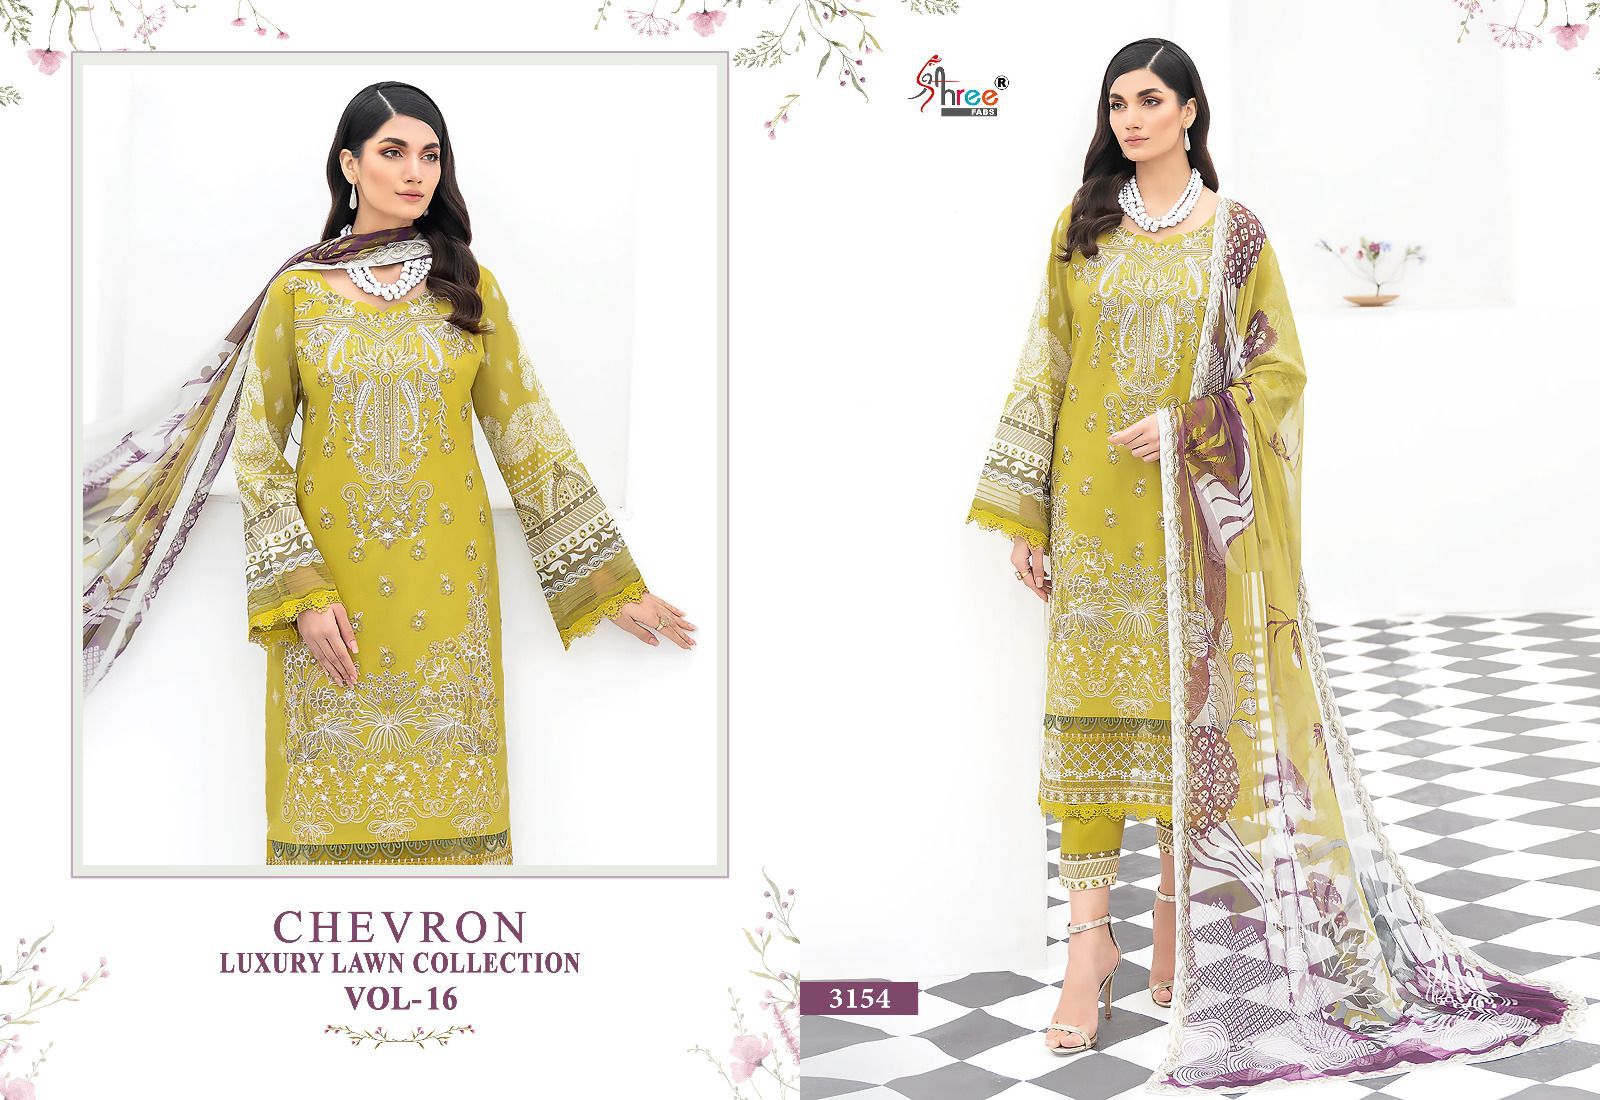 Shree Chevron Luxury Lawn Collection Vol 16 collection 10